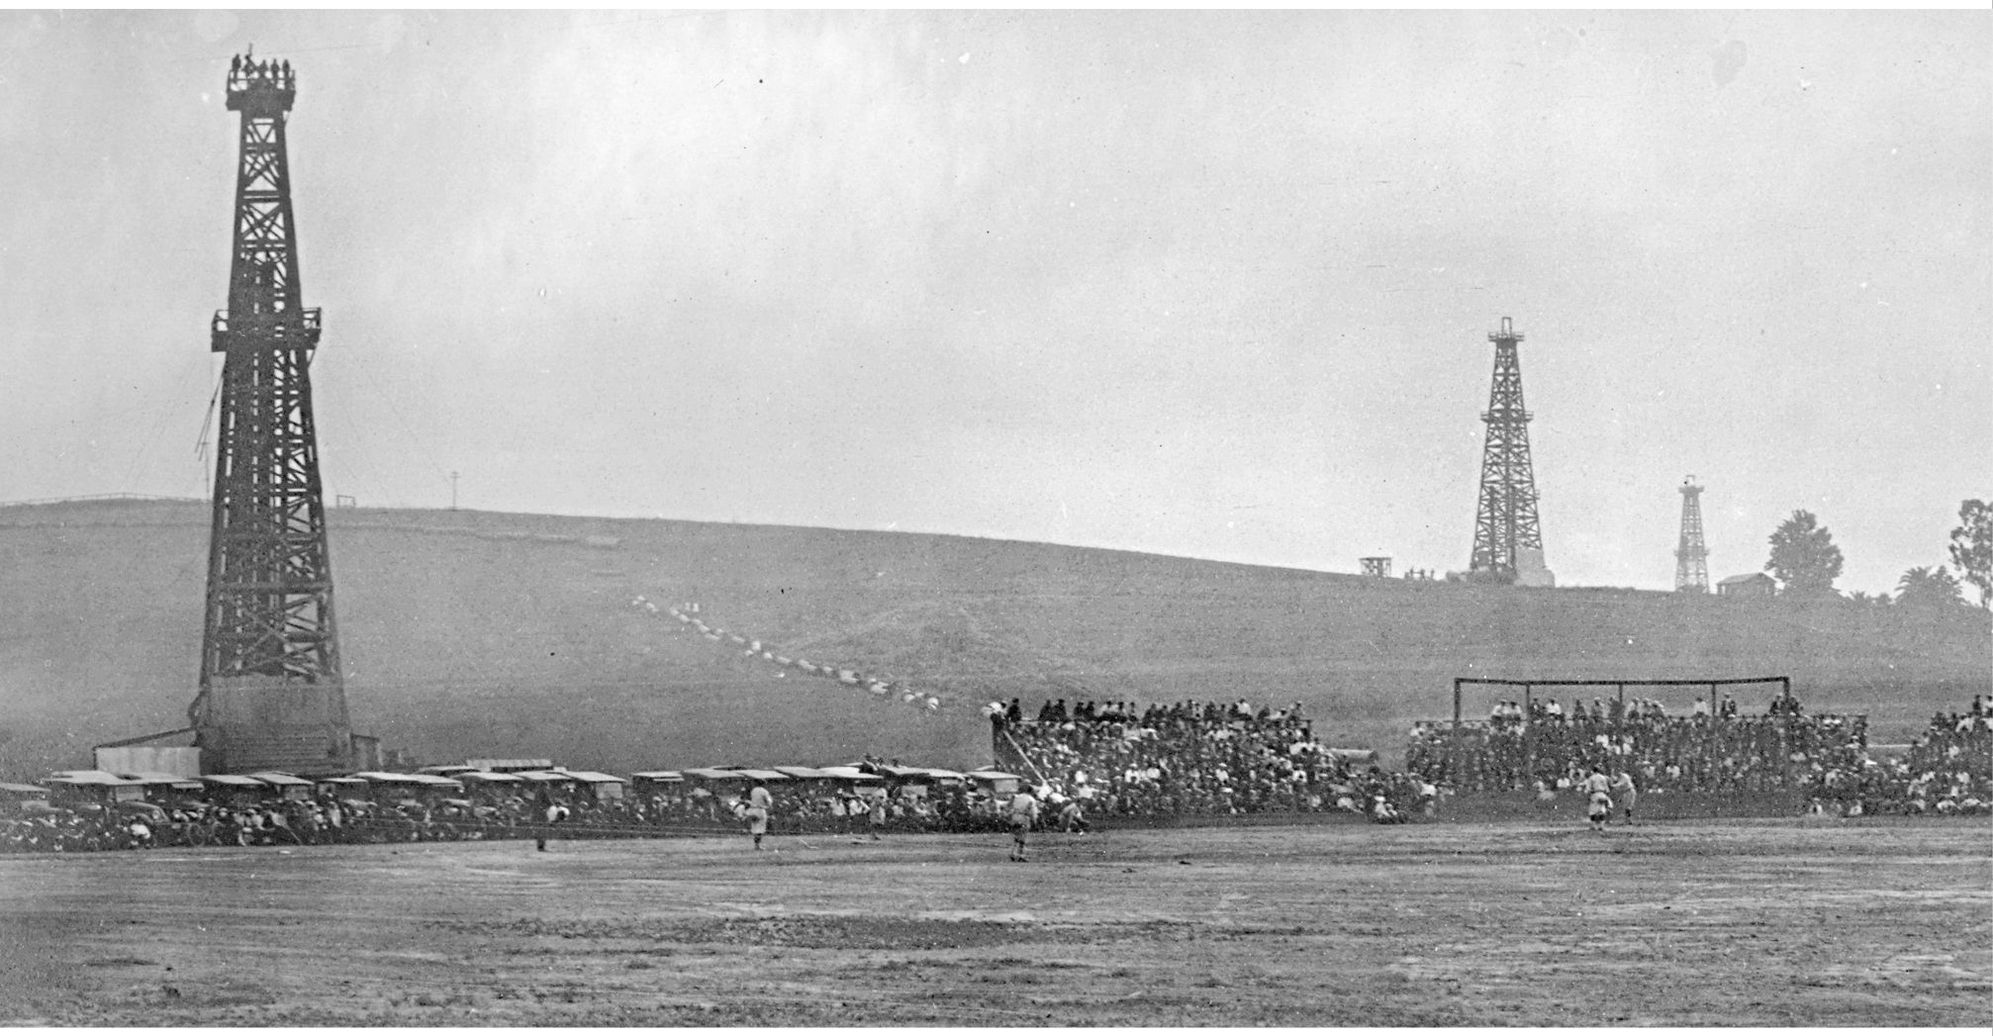 SHELL FIELD PANORAMA An early 1920s panorama sequence of Shell Park shows the - photo 6